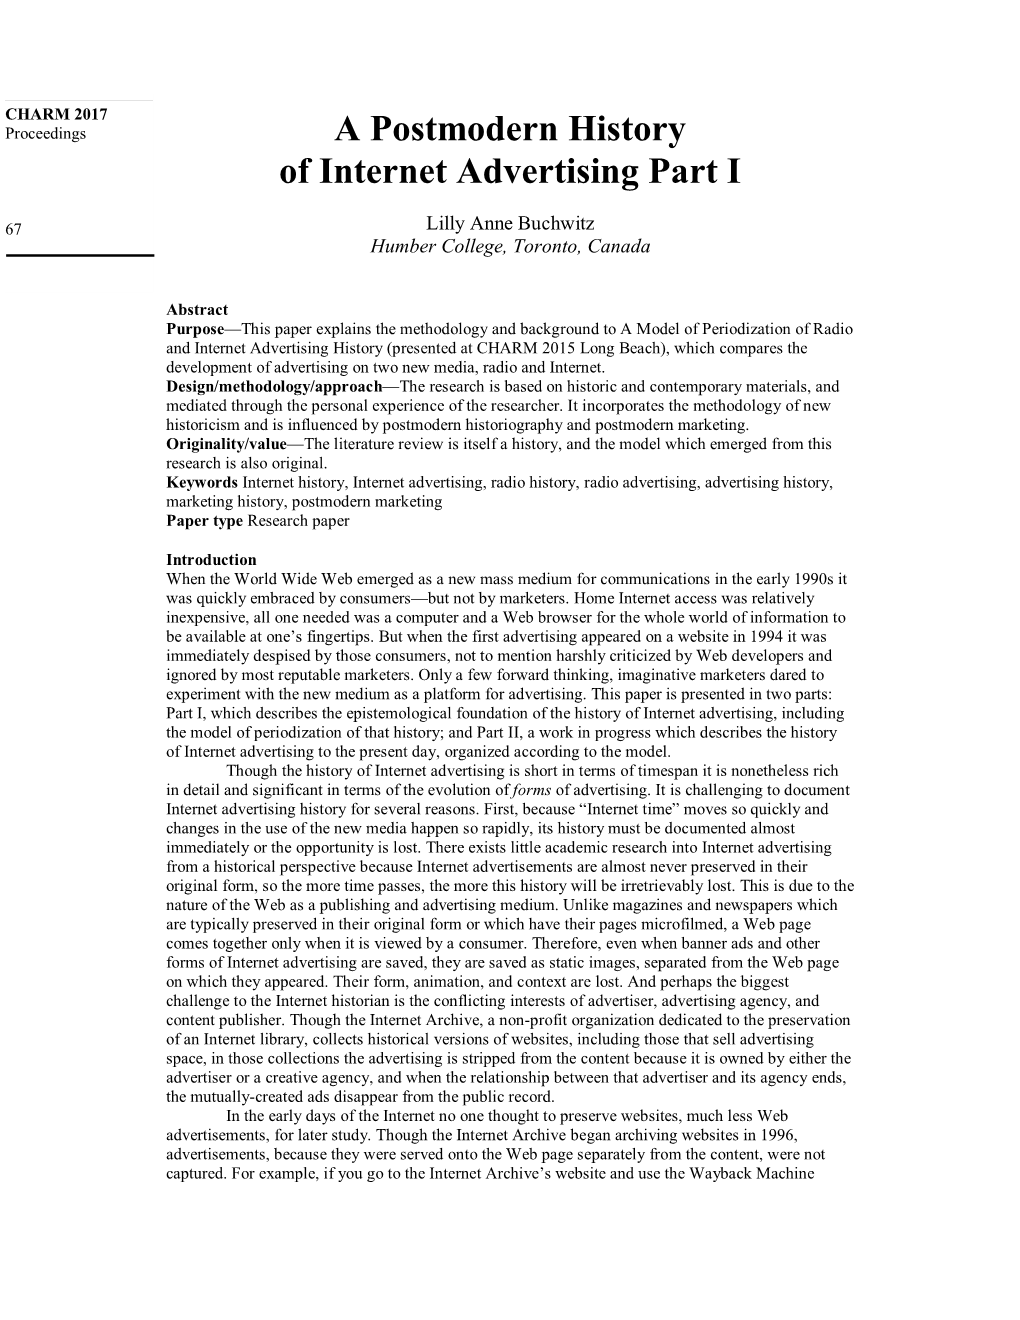 A Postmodern History of Internet Advertising Part I